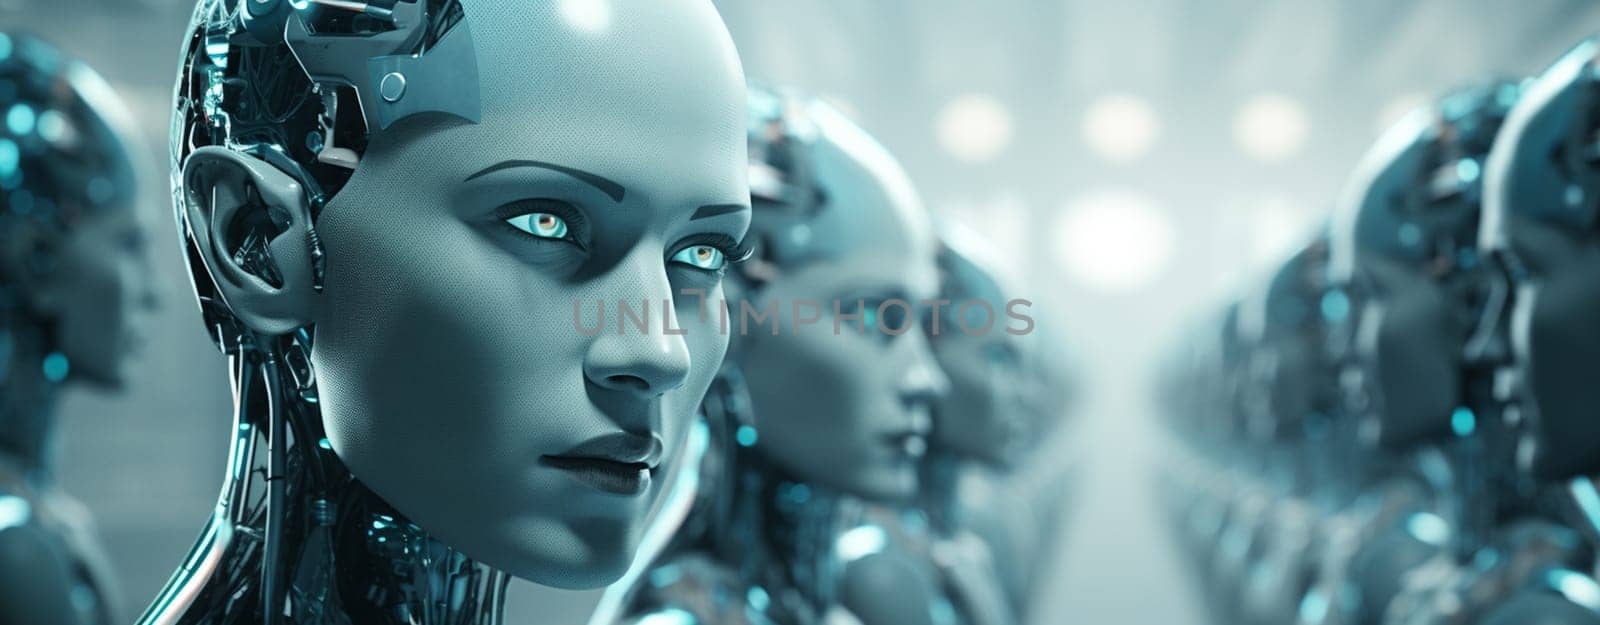 Leadership concept with 3d rendering female cyborg or robot arm crossed with robot army by Andelov13